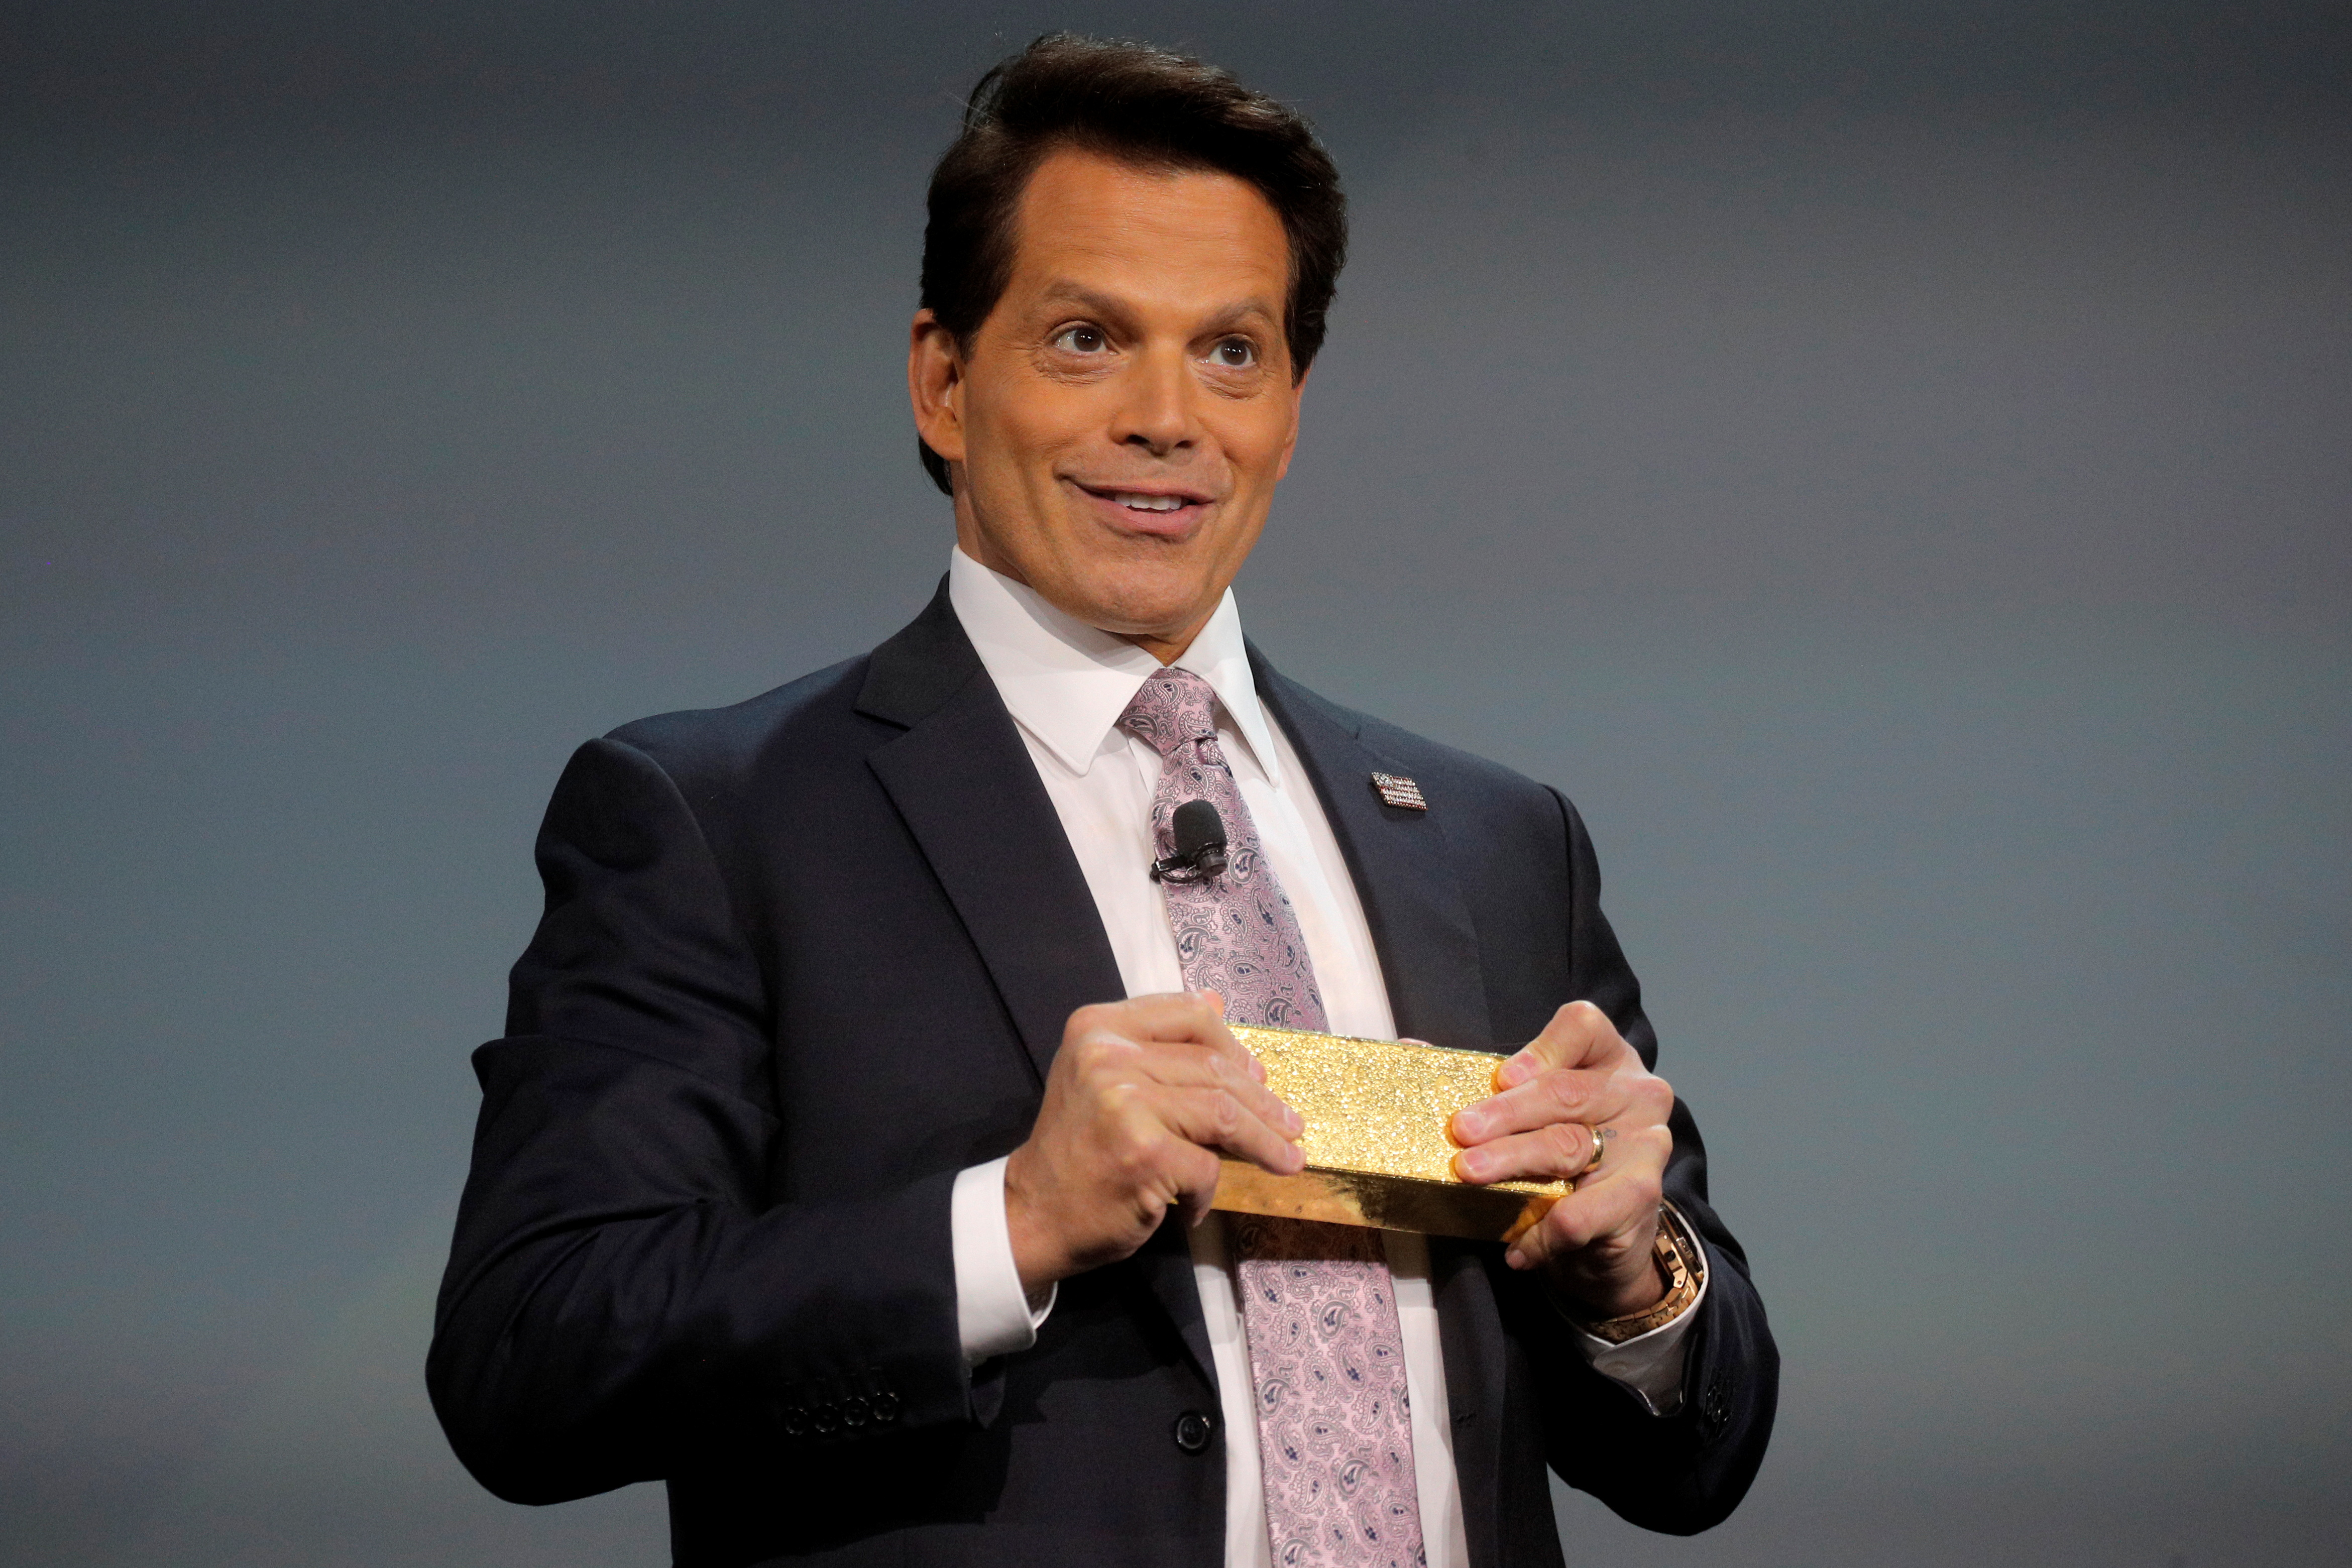 Anthony Scaramucci, Founder & Managing Partner of SkyBridge Capital, holds a gold bar while hosting the Skybridge Capital SALT New York 2021 conference in New York